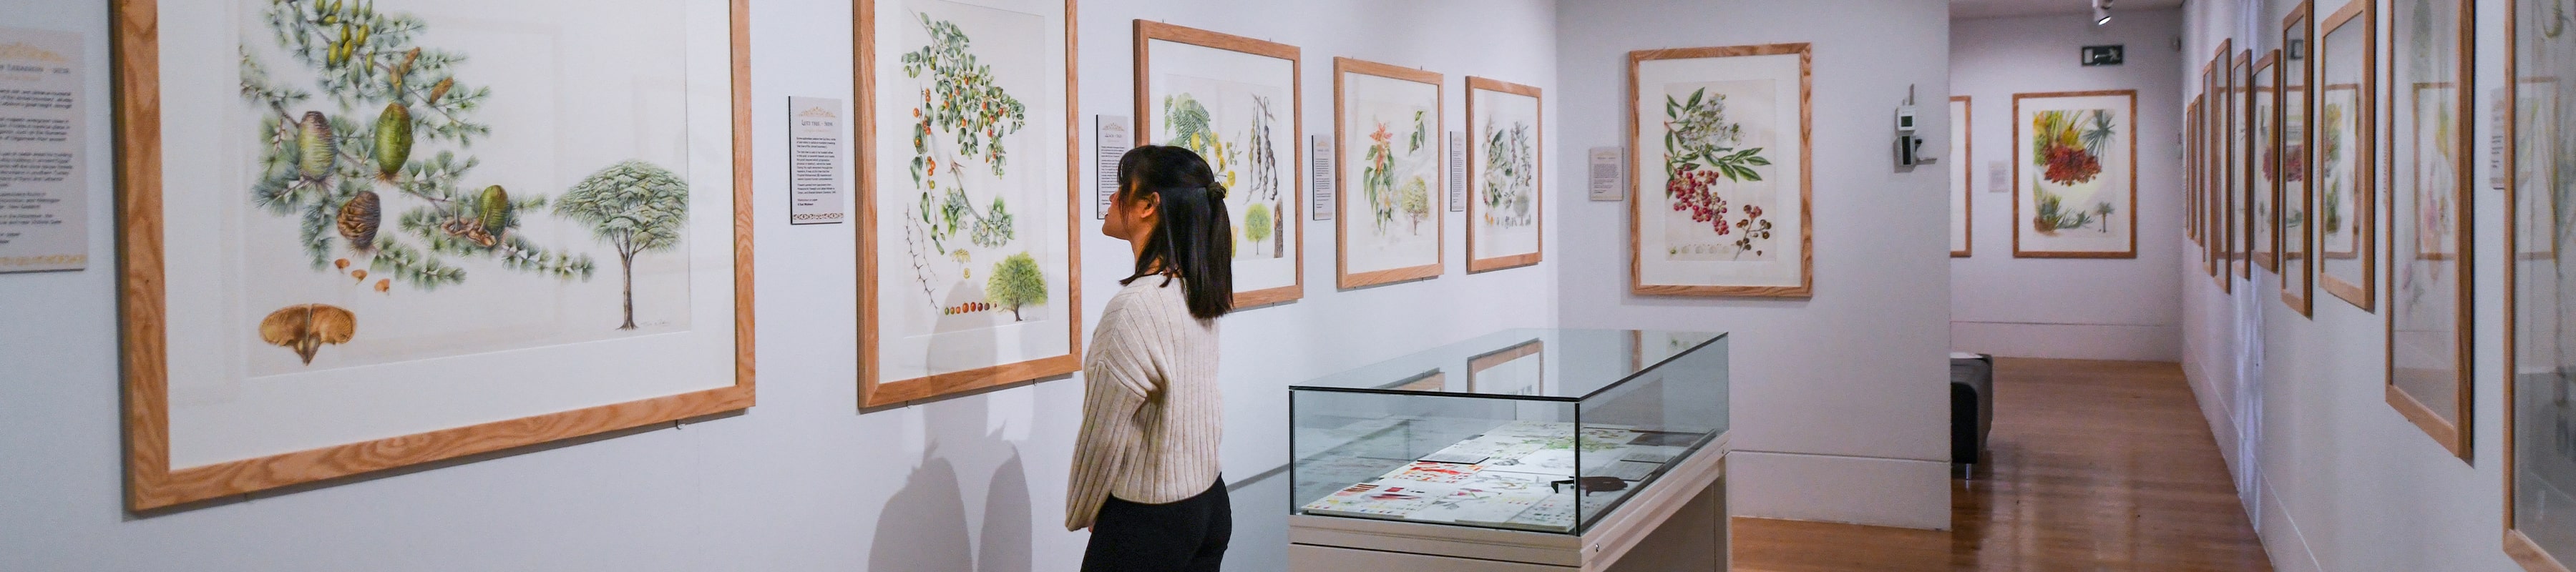 Woman inspecting botanical paintings on the wall of a gallery